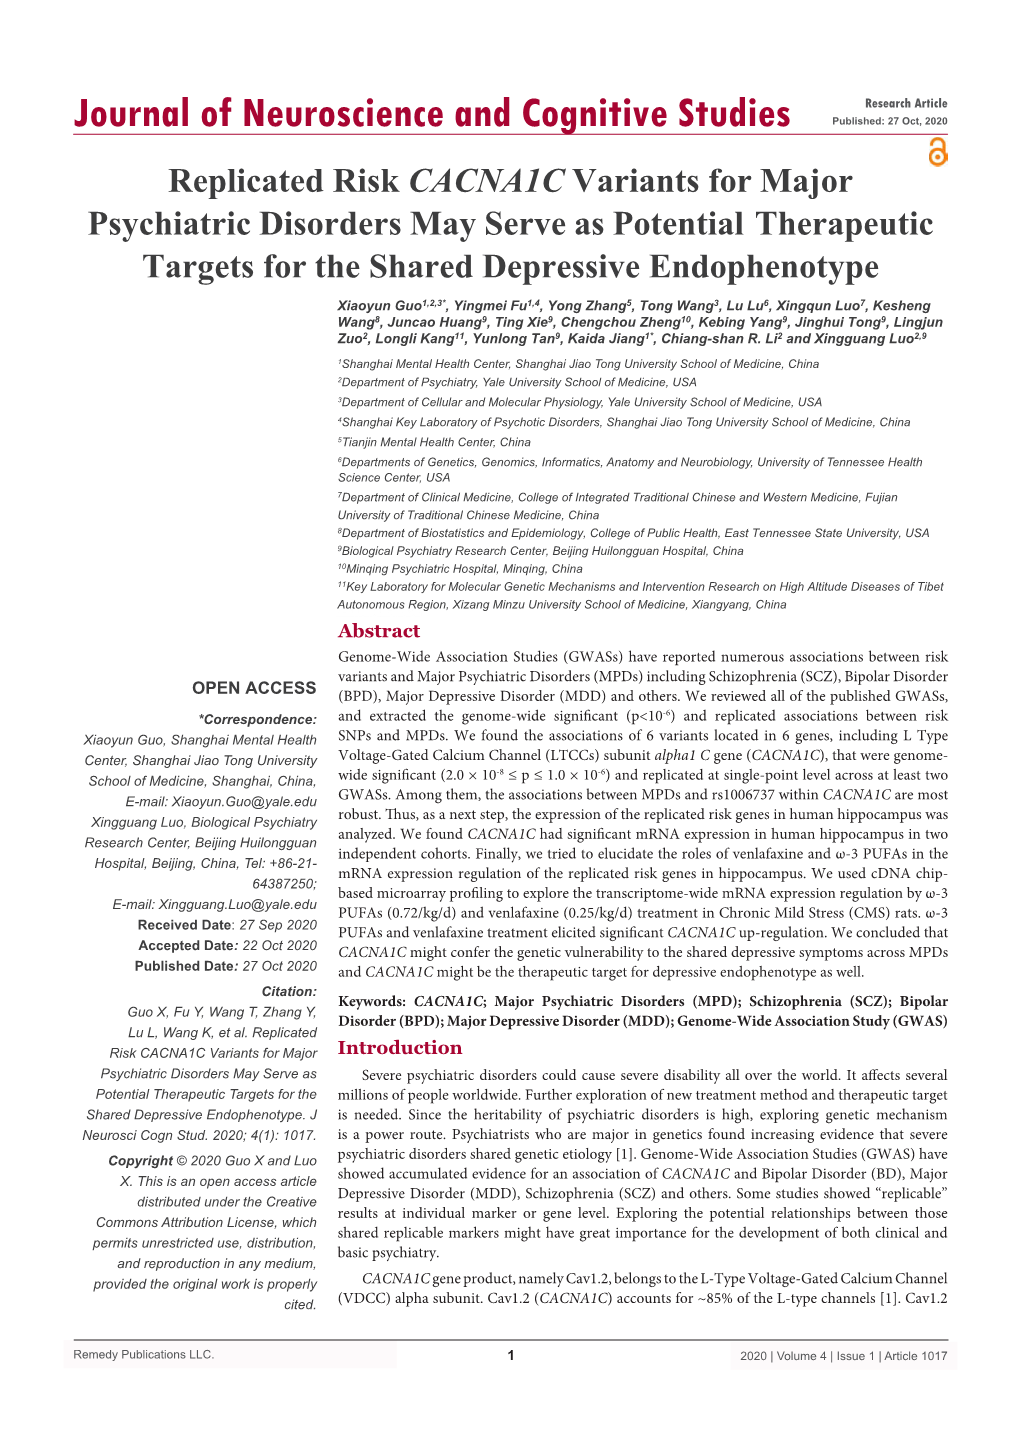 Replicated Risk CACNA1C Variants for Major Psychiatric Disorders May Serve As Potential Therapeutic Targets for the Shared Depressive Endophenotype